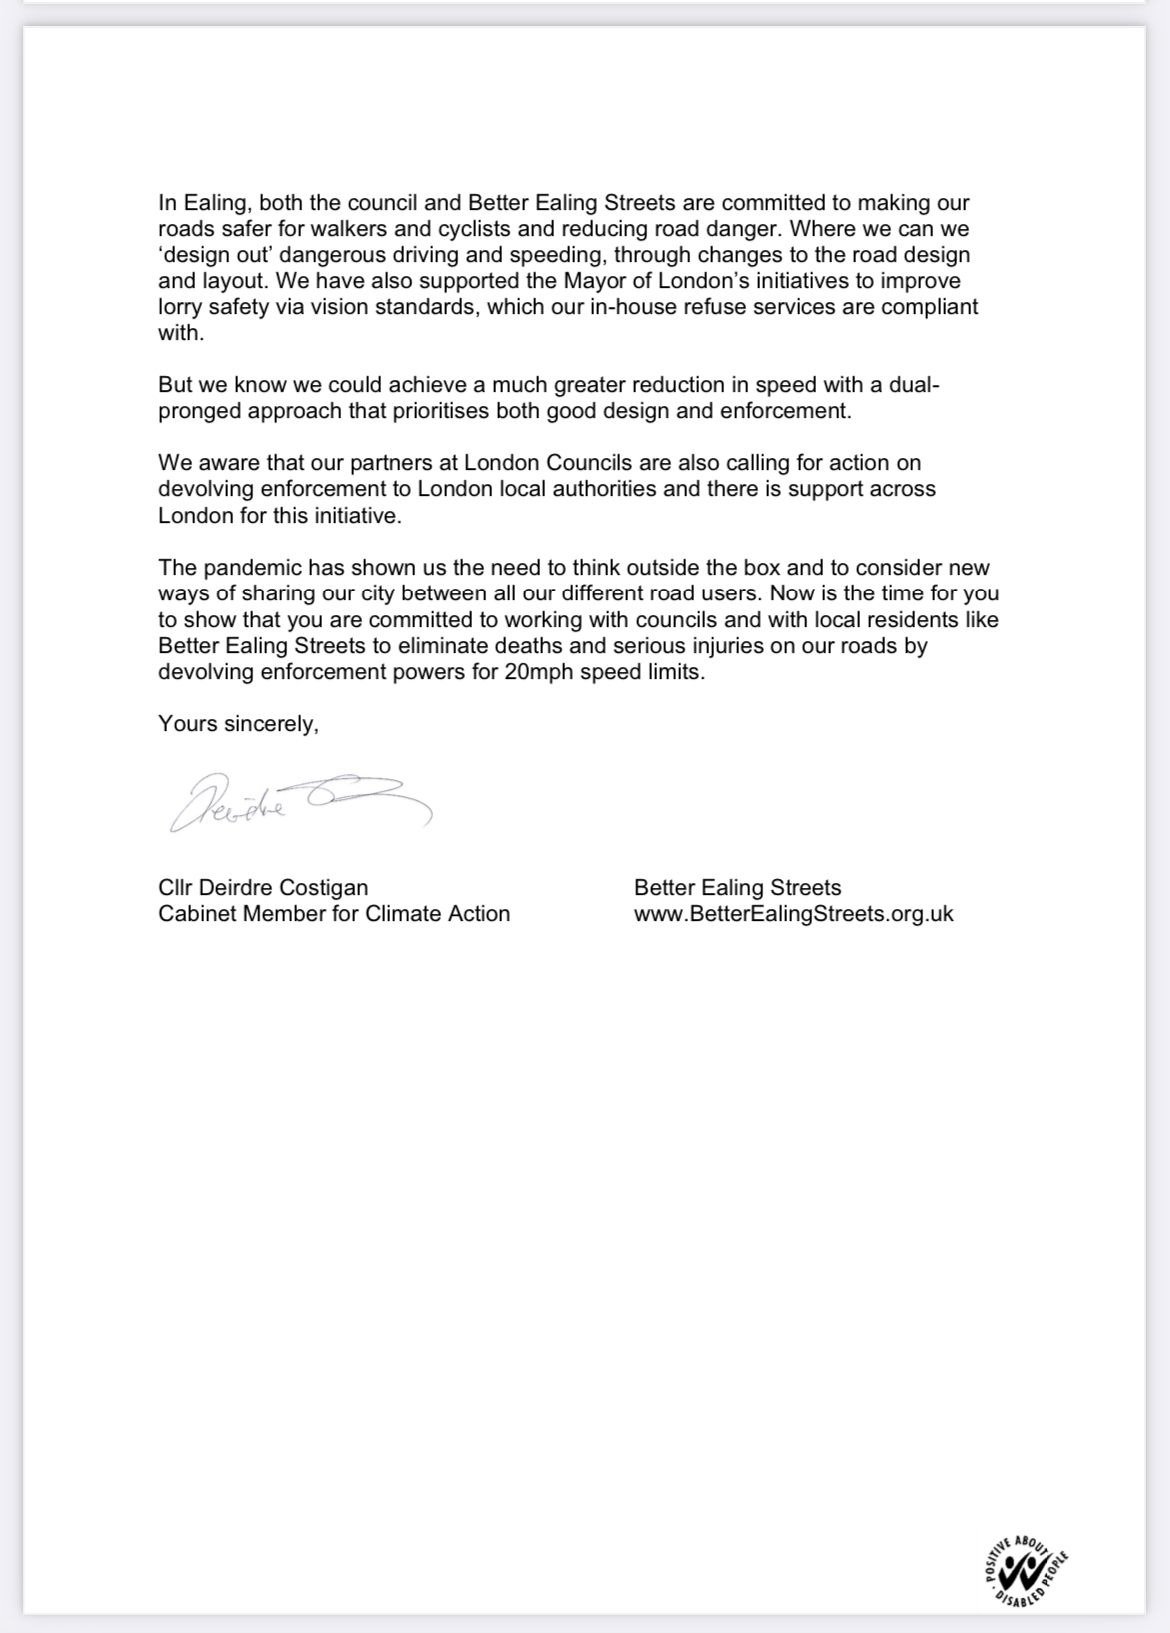 An image of the letter sent. Please see tweets above for a link to a text version.